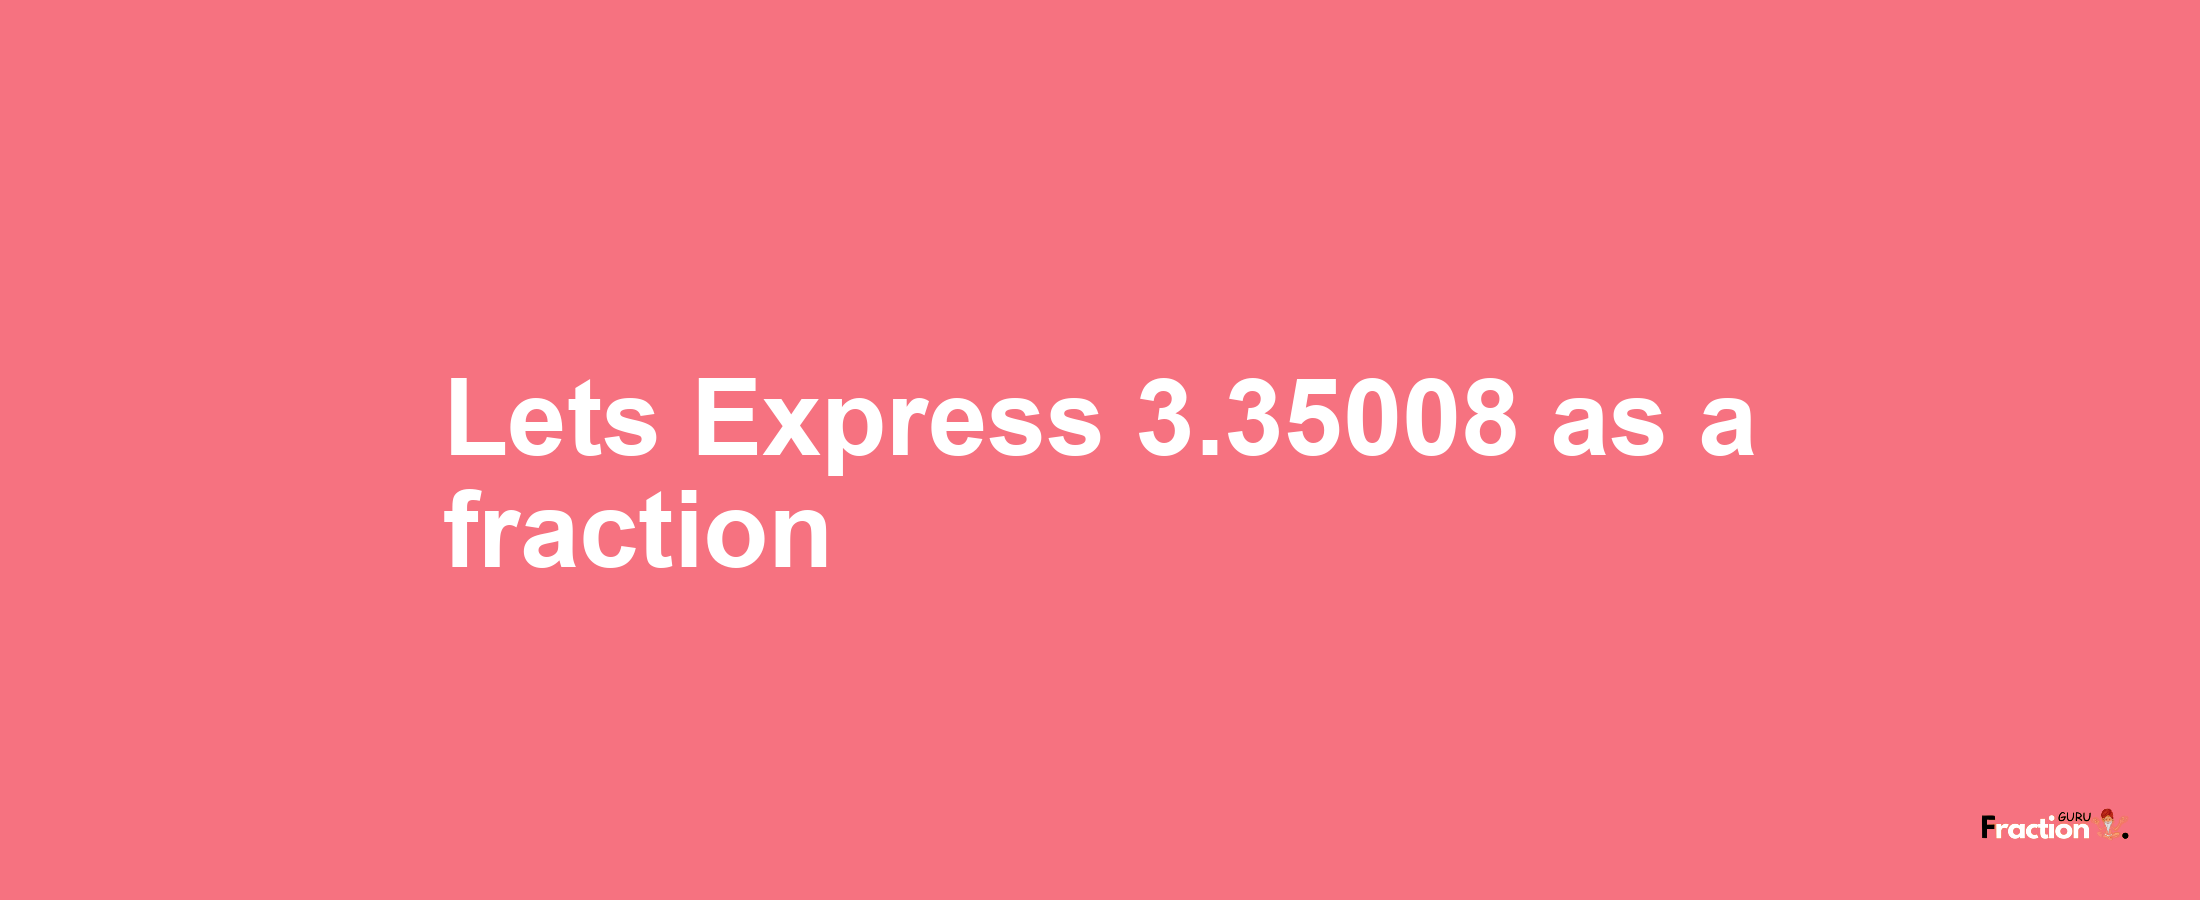 Lets Express 3.35008 as afraction